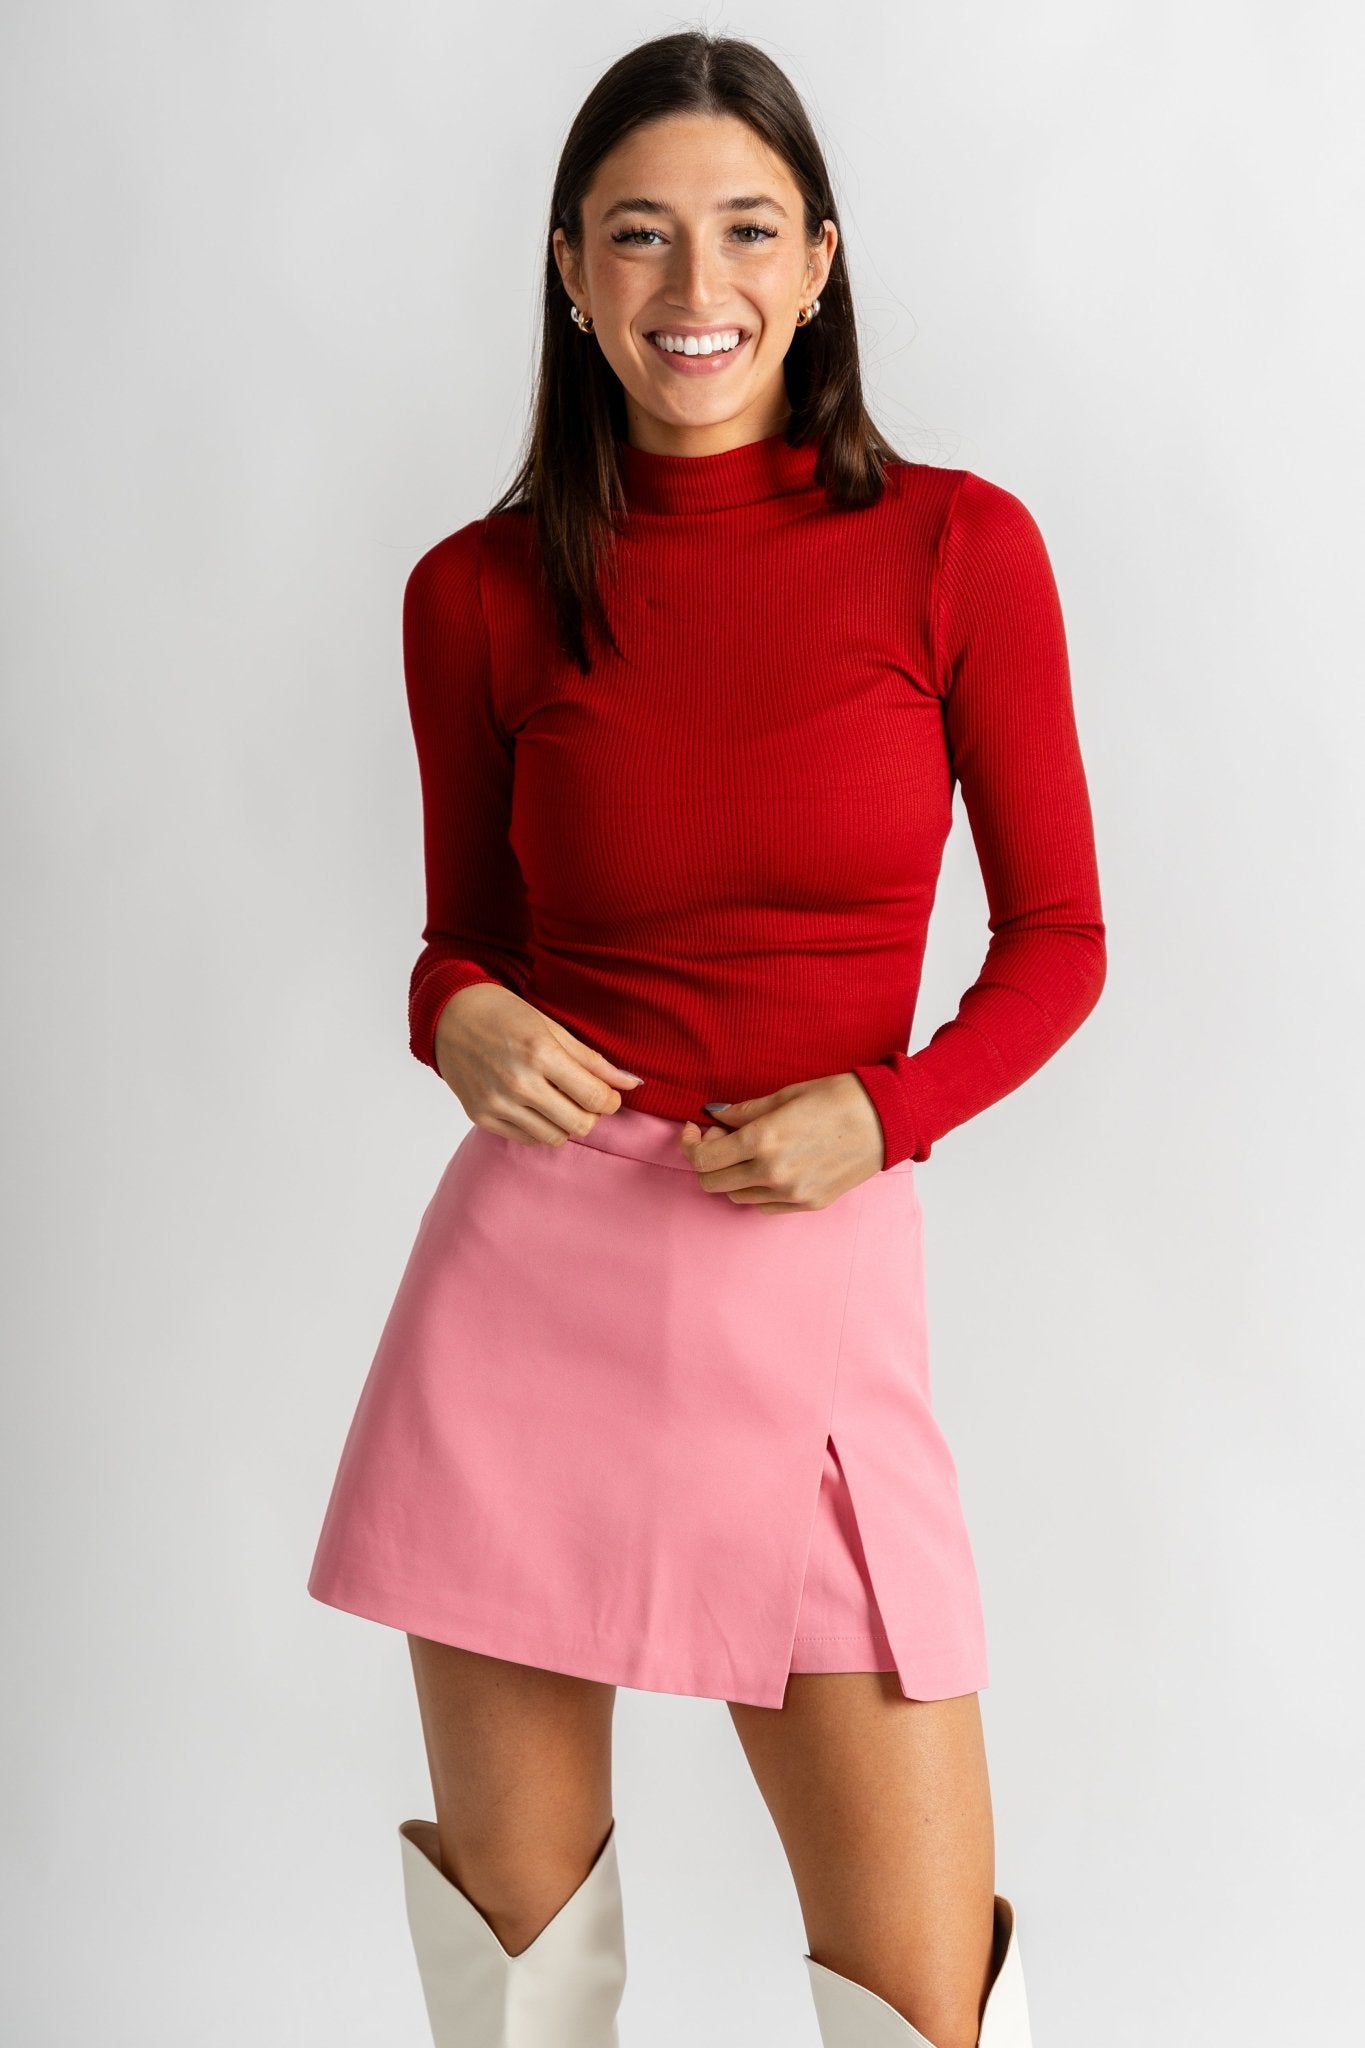 High waist skort with slit pink - Cute Valentine's Day Outfits at Lush Fashion Lounge Boutique in Oklahoma City